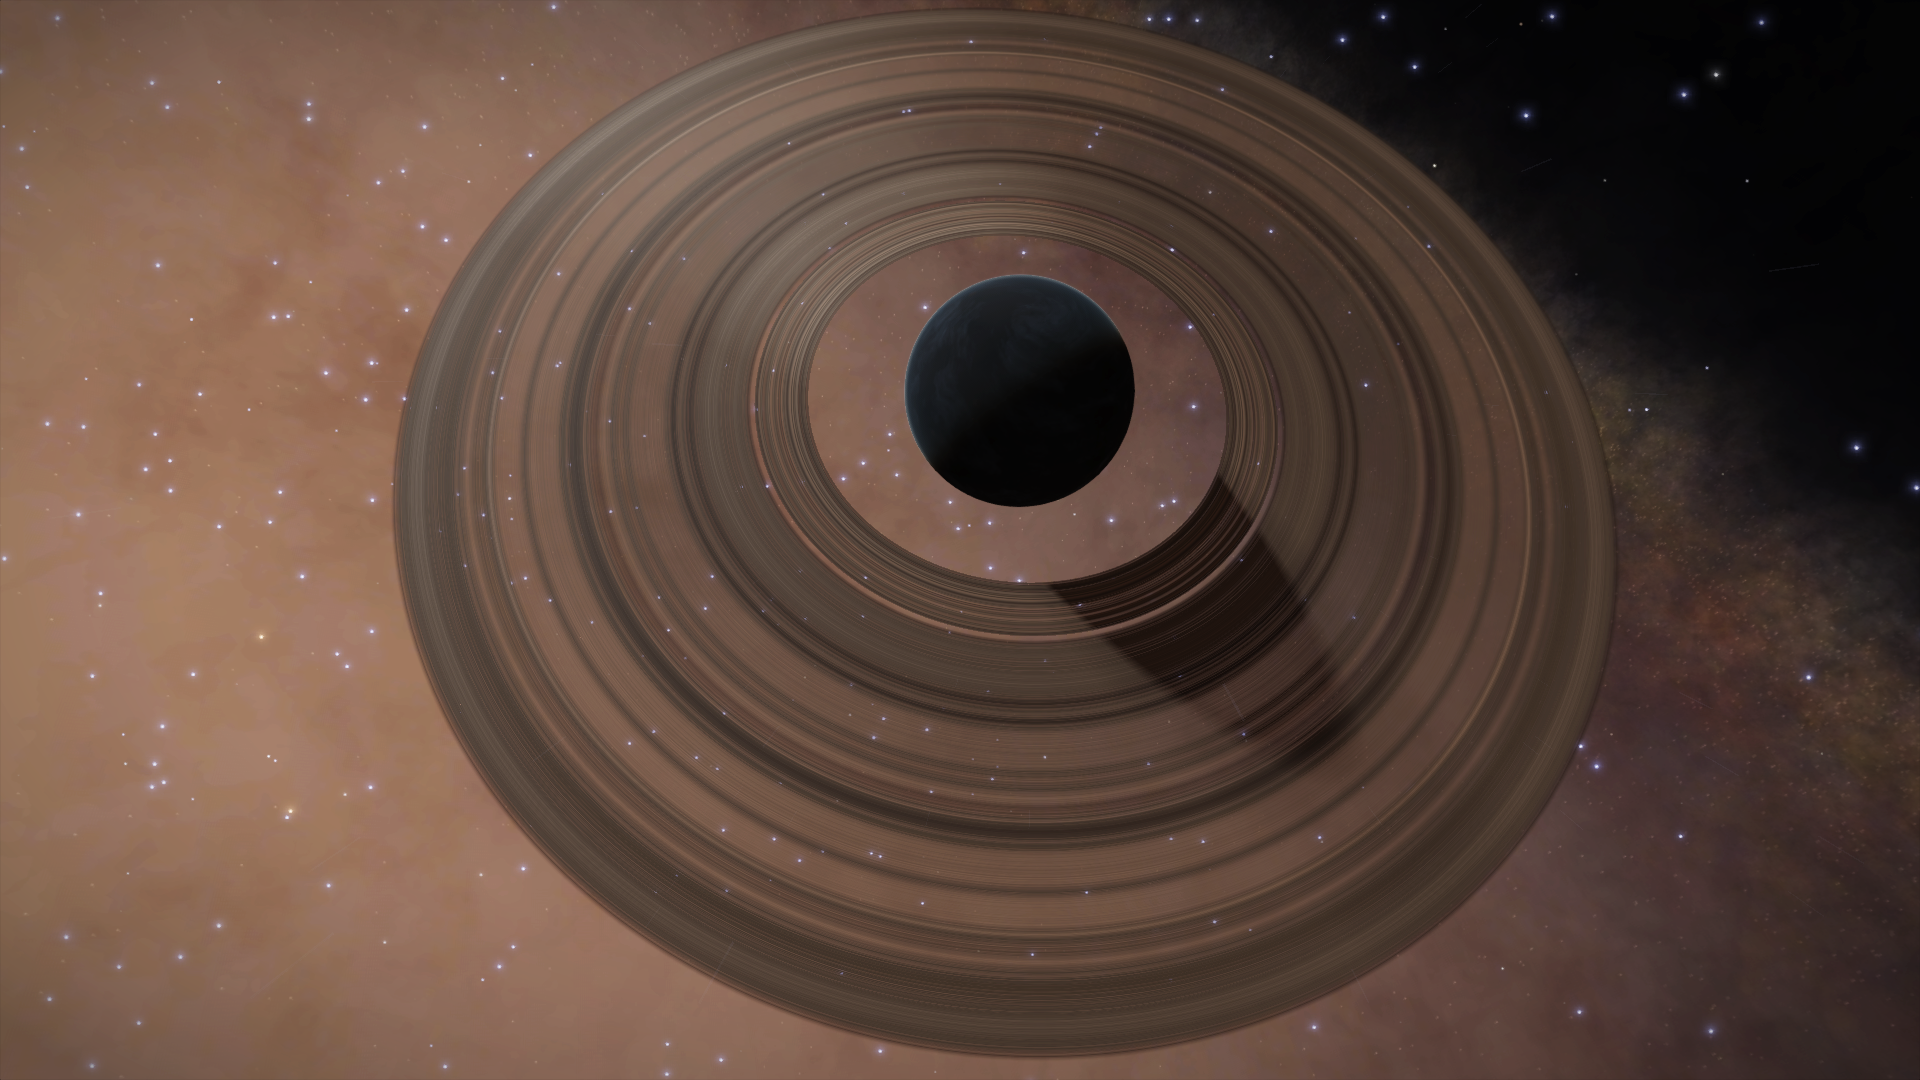 A ringed planet